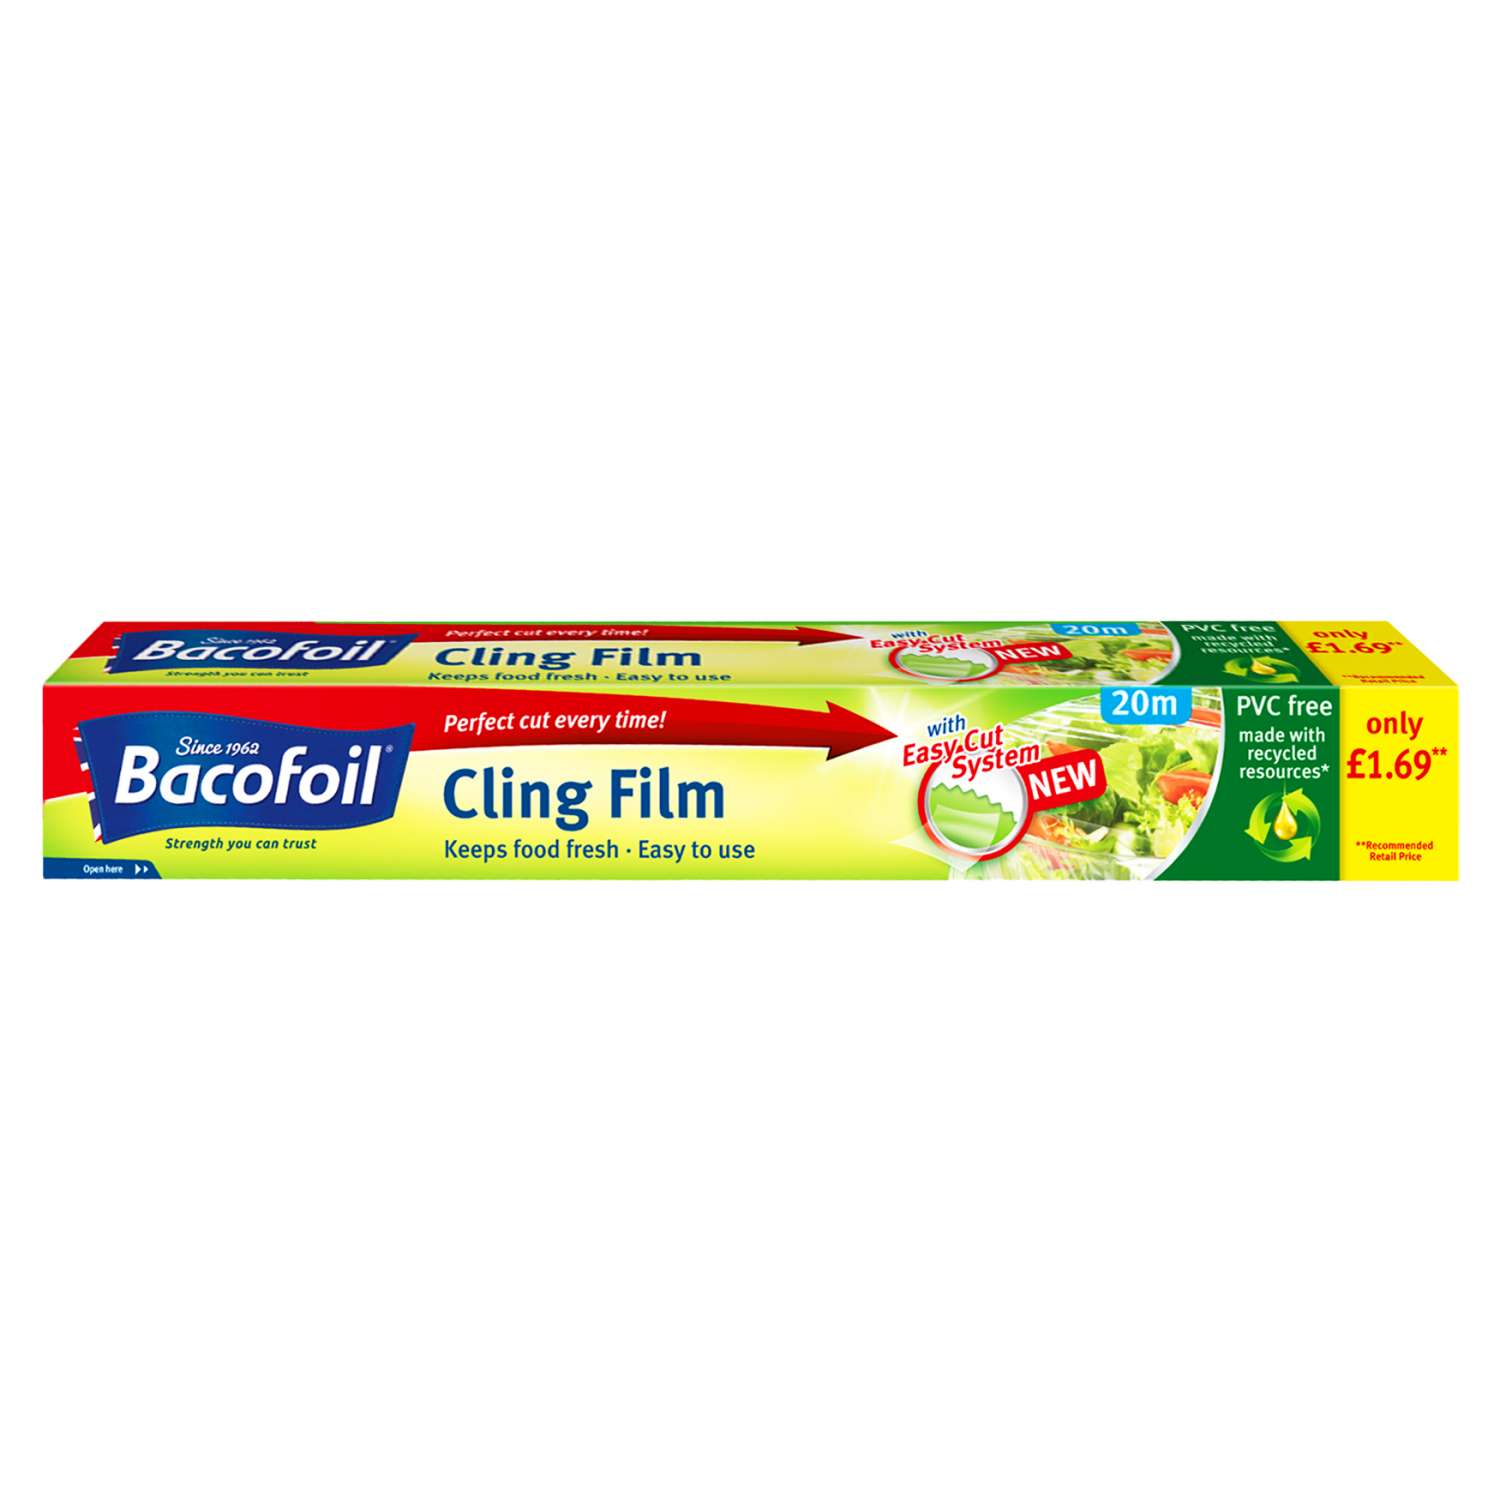 Bacofoil Cling Film 20m – A. B. Snell & Son